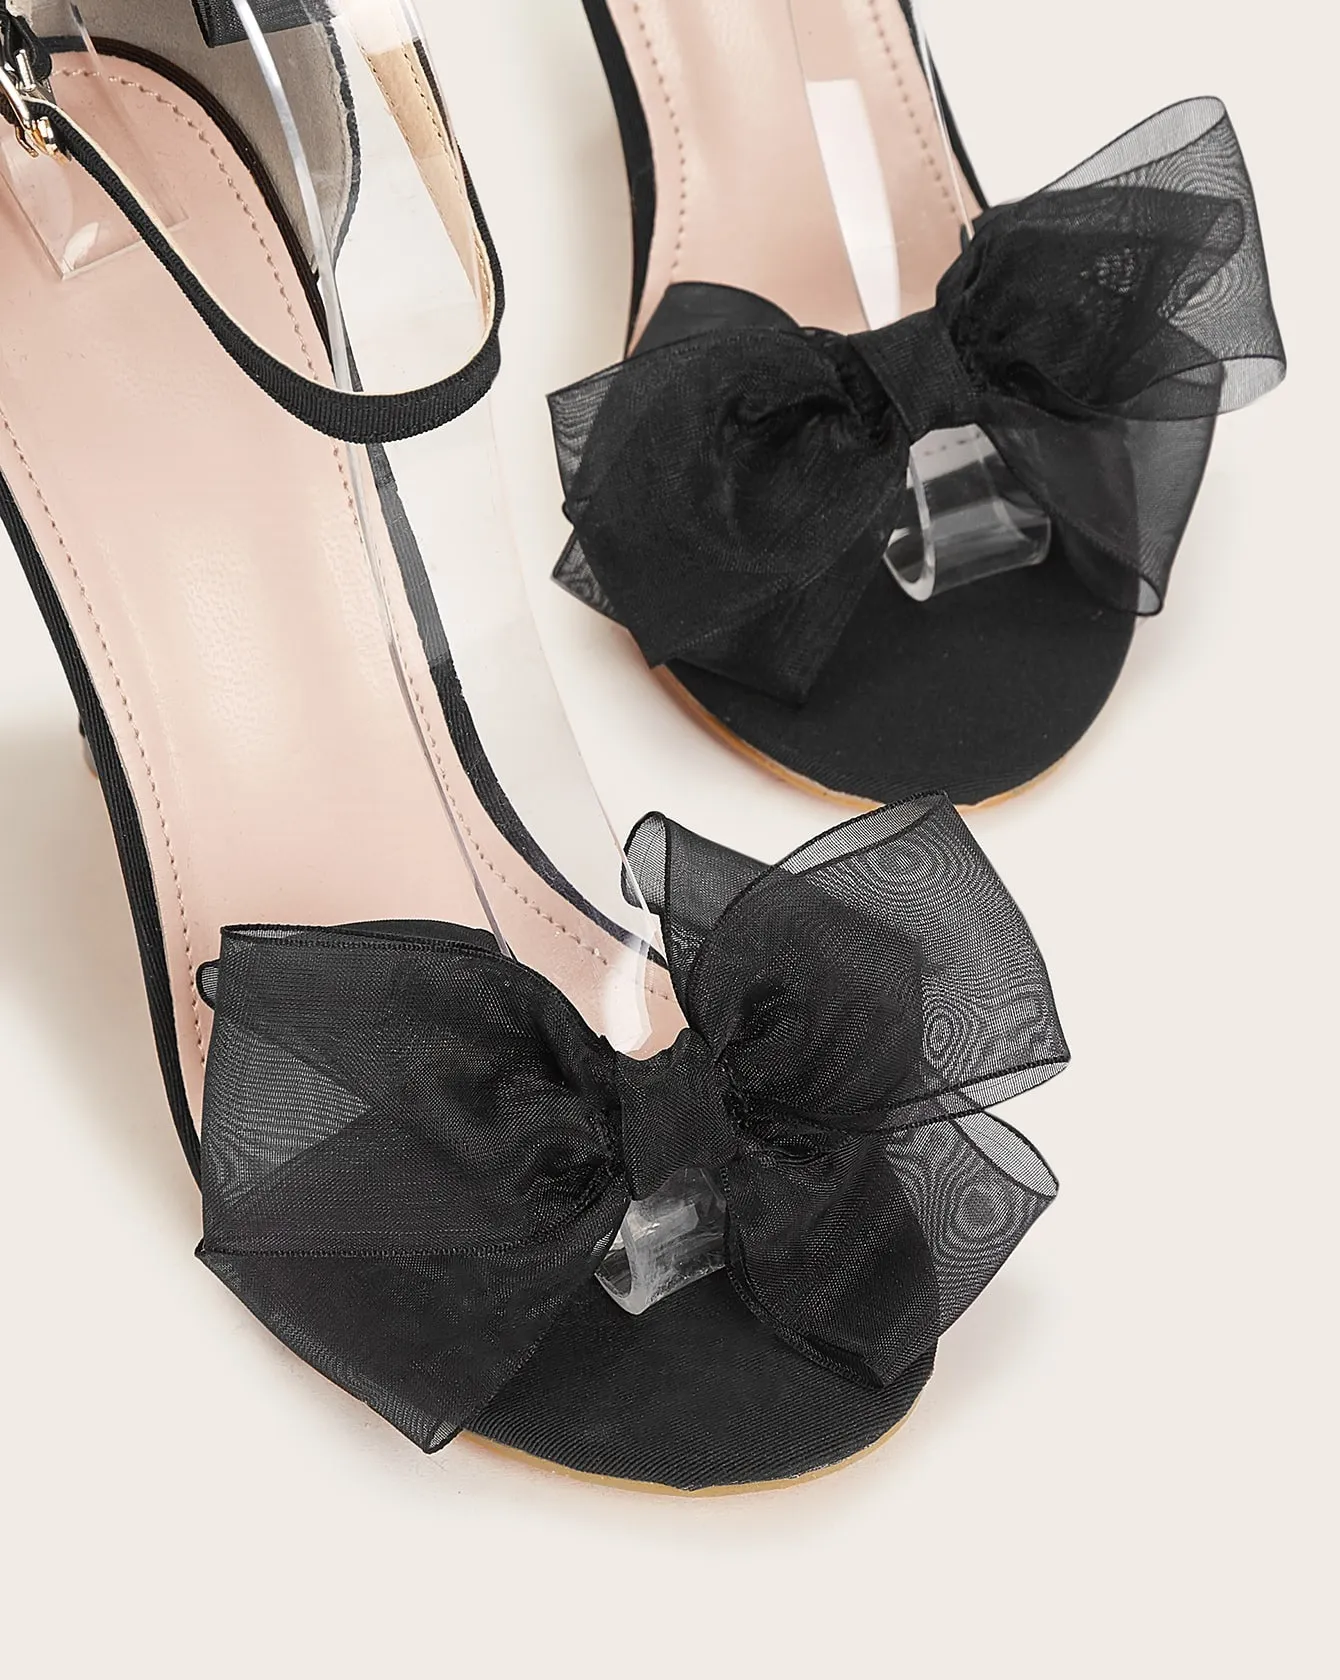 Wedding Sandals Satin Shoe Face Round Head Fine Heel Shoe Large Size Fish Mouth Lace Bow Heels